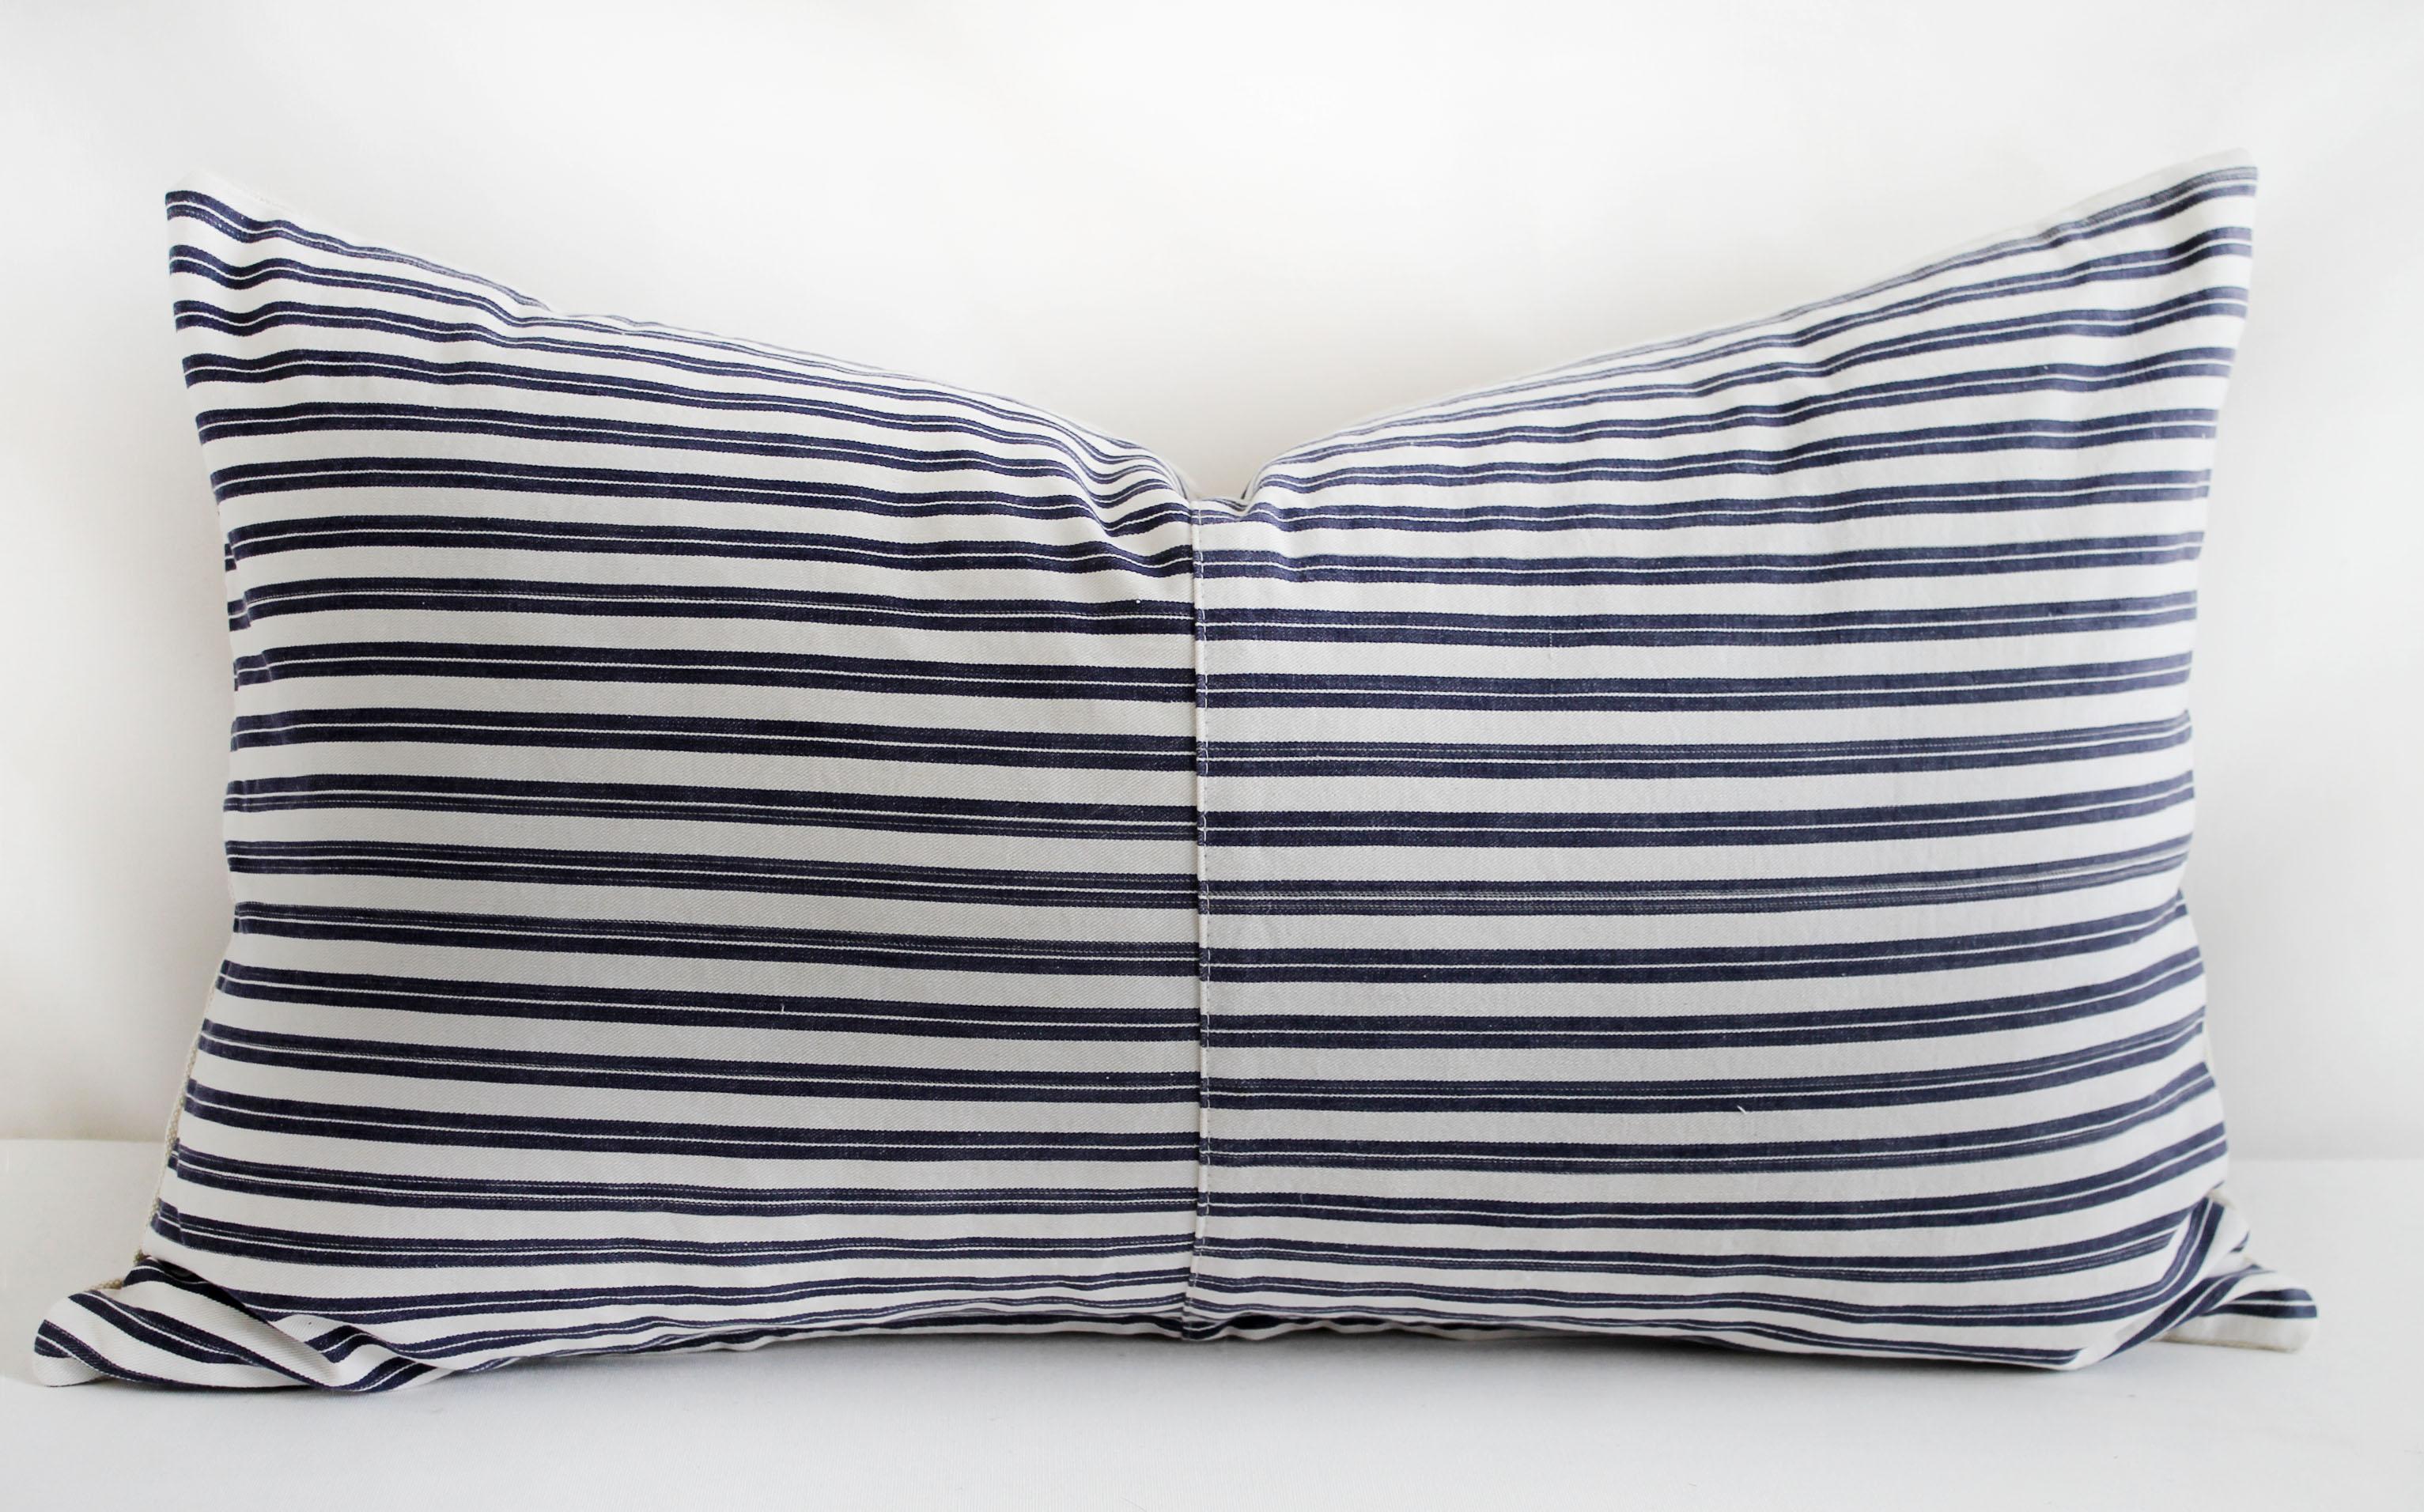 Vintage navy blue and white French ticking stripe lumbar pillow
The face is made from a vintage French textile in a navy blue an white ticking.
We have 2 available, this one shown has a seam in the center, the other is a solid face with no